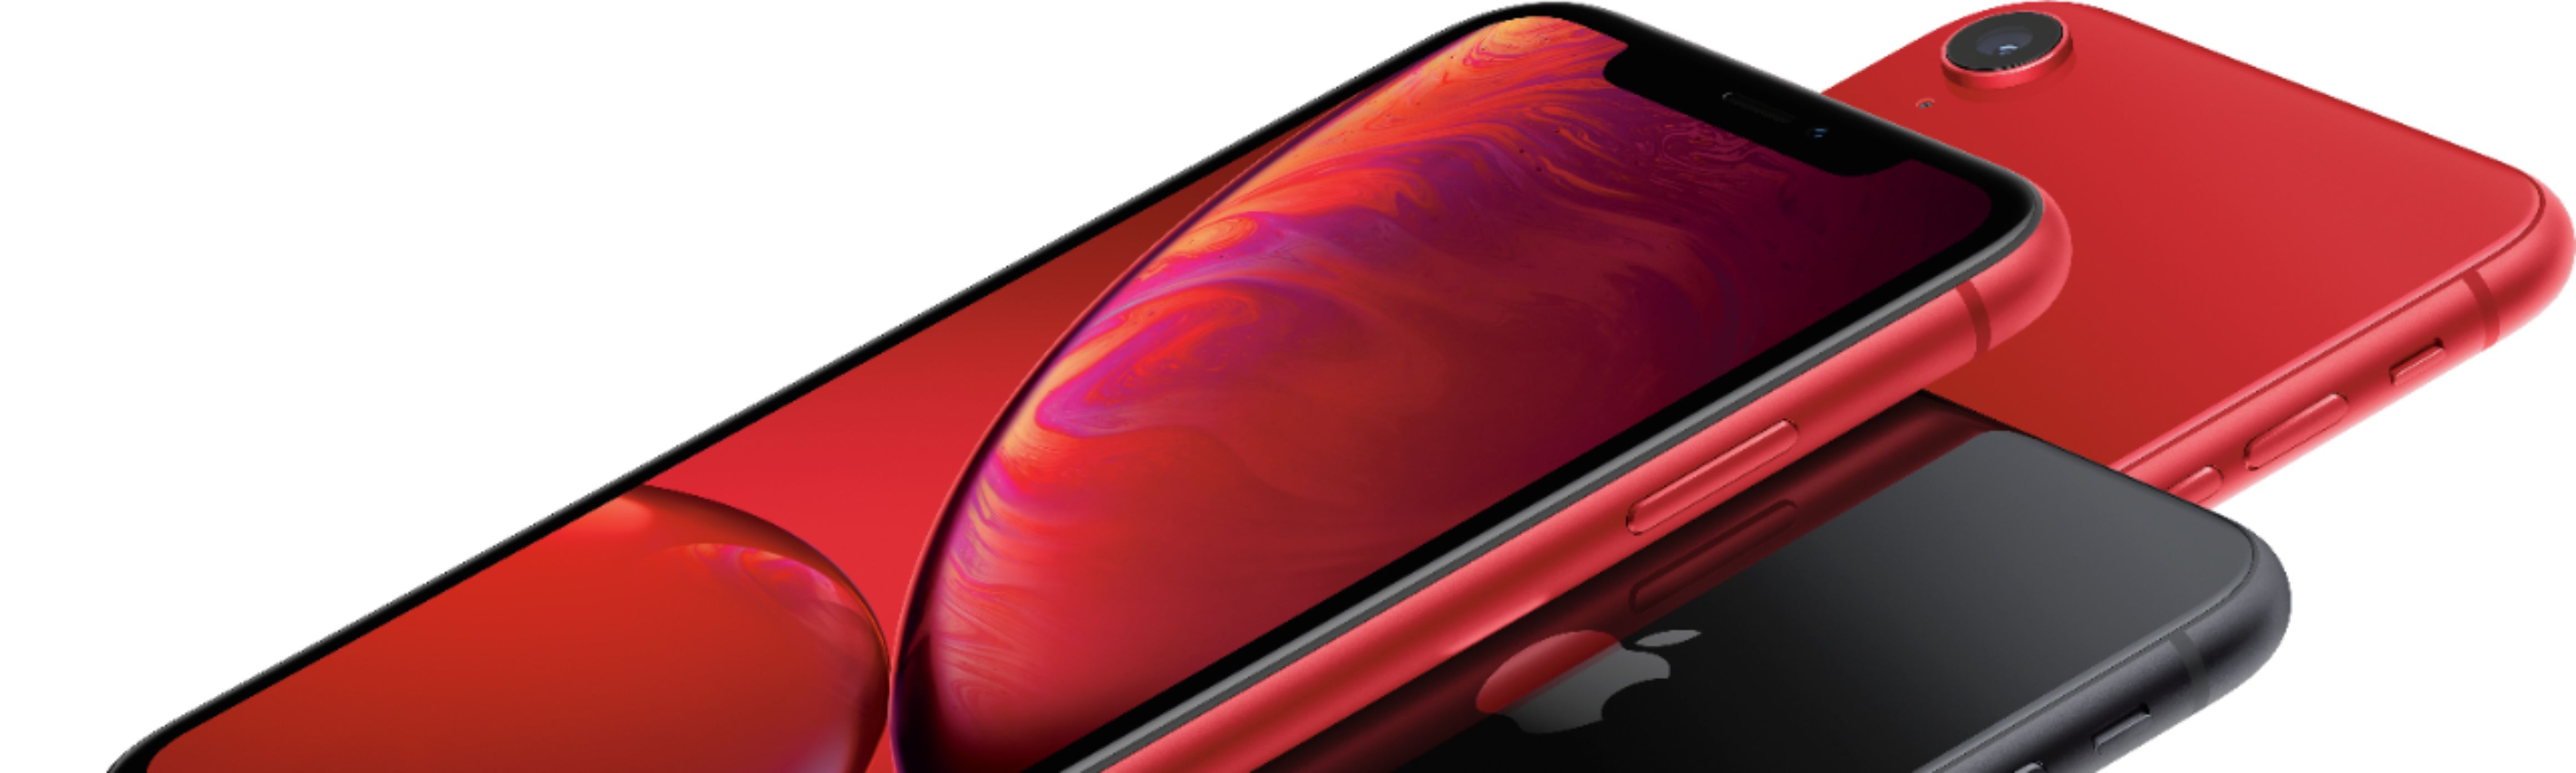 Best Buy: Apple iPhone XR 64GB (PRODUCT)RED™ (AT&T) MRYU2LL/A